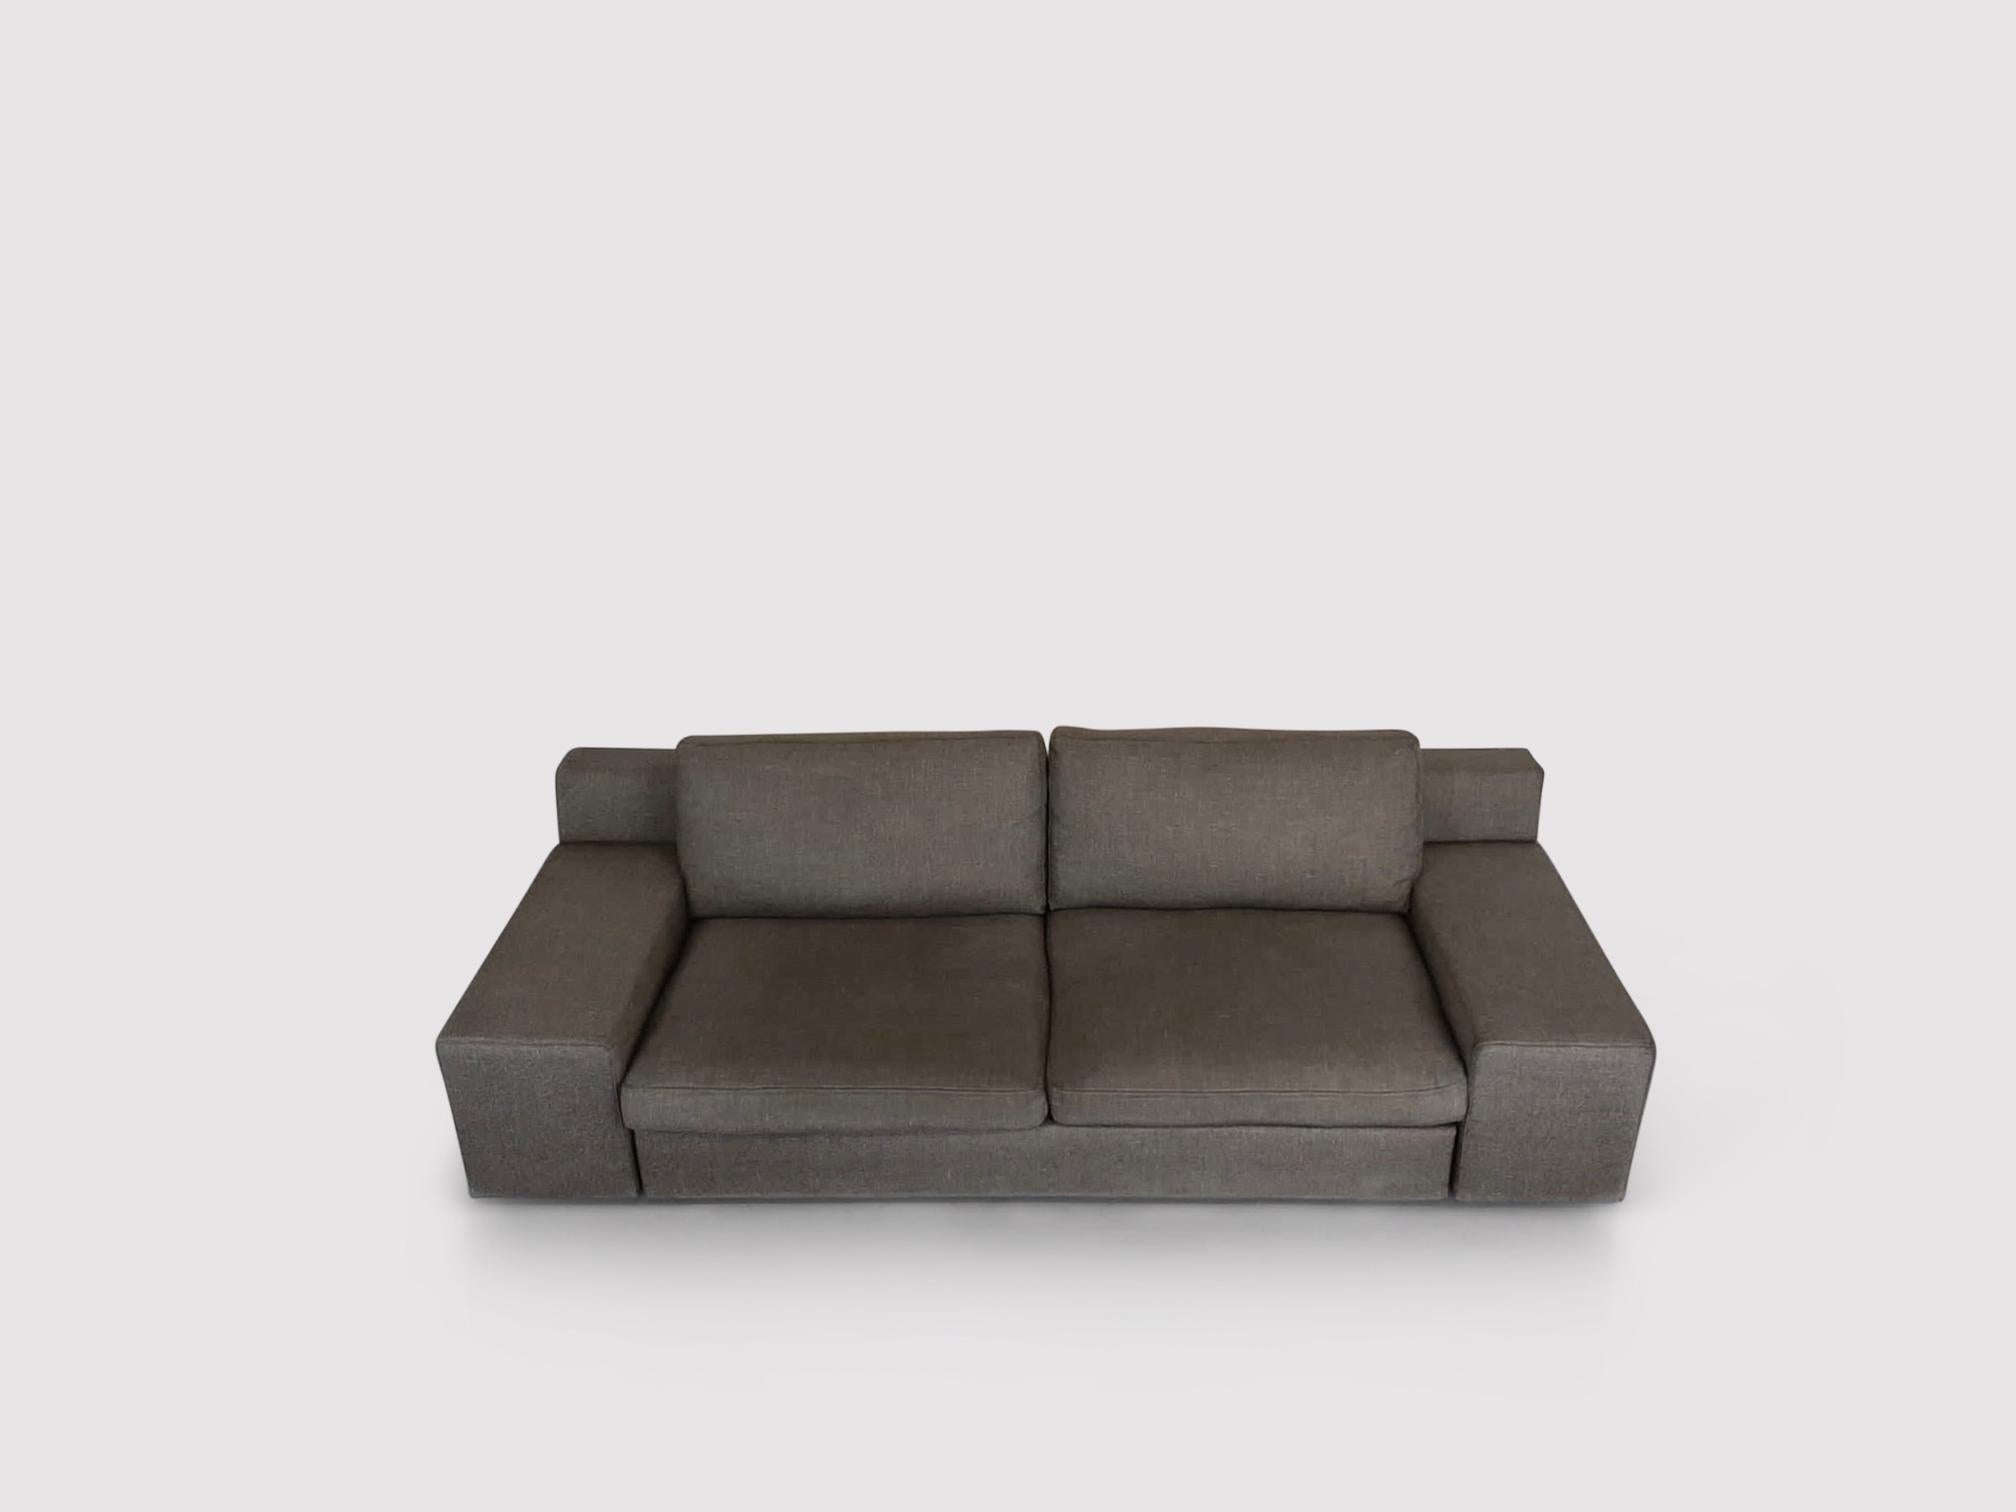 Contemporary 235-236 Mister 2, 5 Seater Sofa by Philippe Starck for Cassina 2004 1